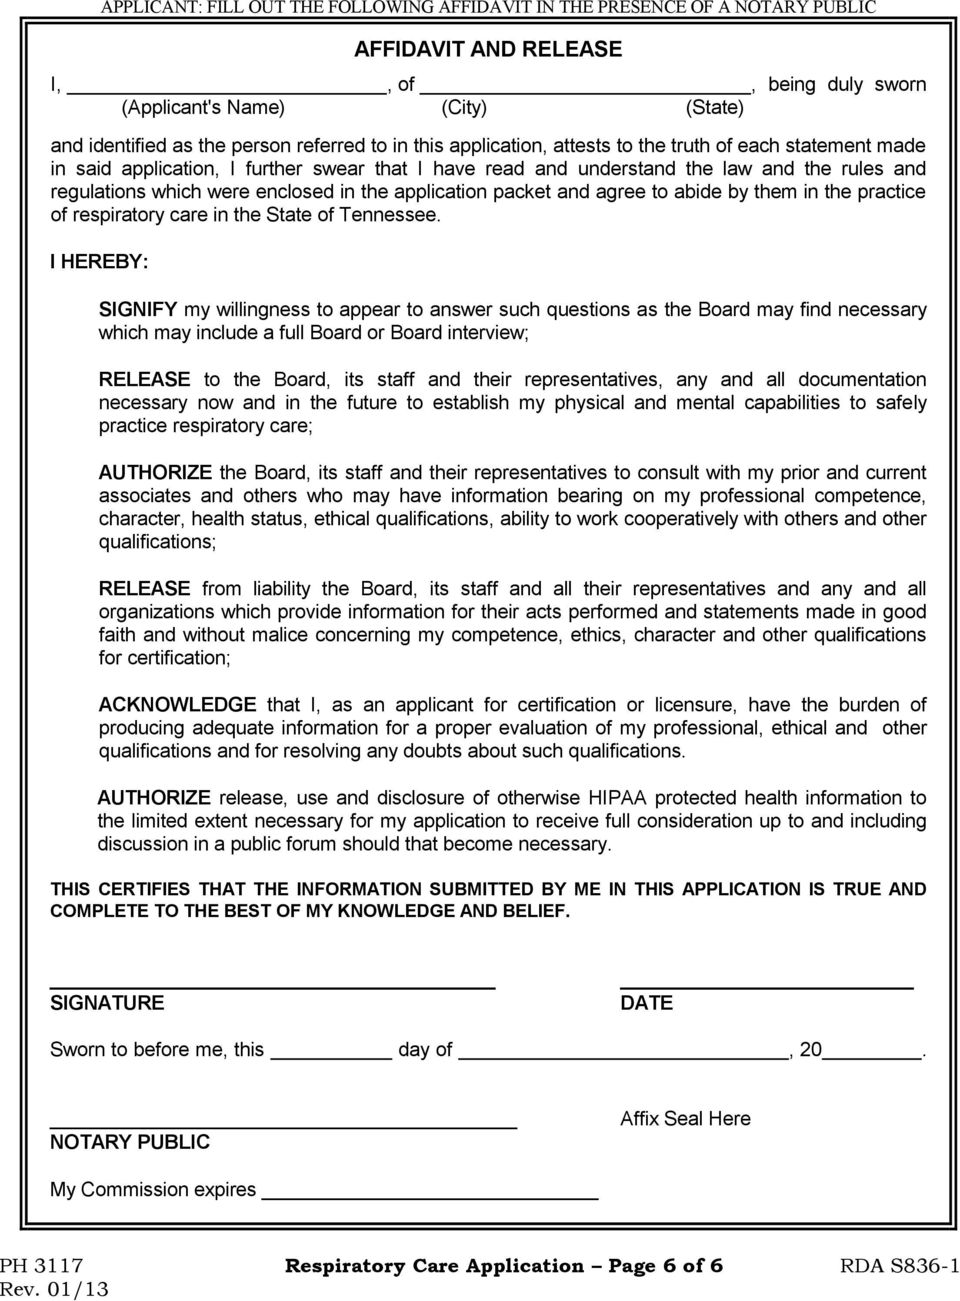 the application packet and agree to abide by them in the practice of respiratory care in the State of Tennessee.